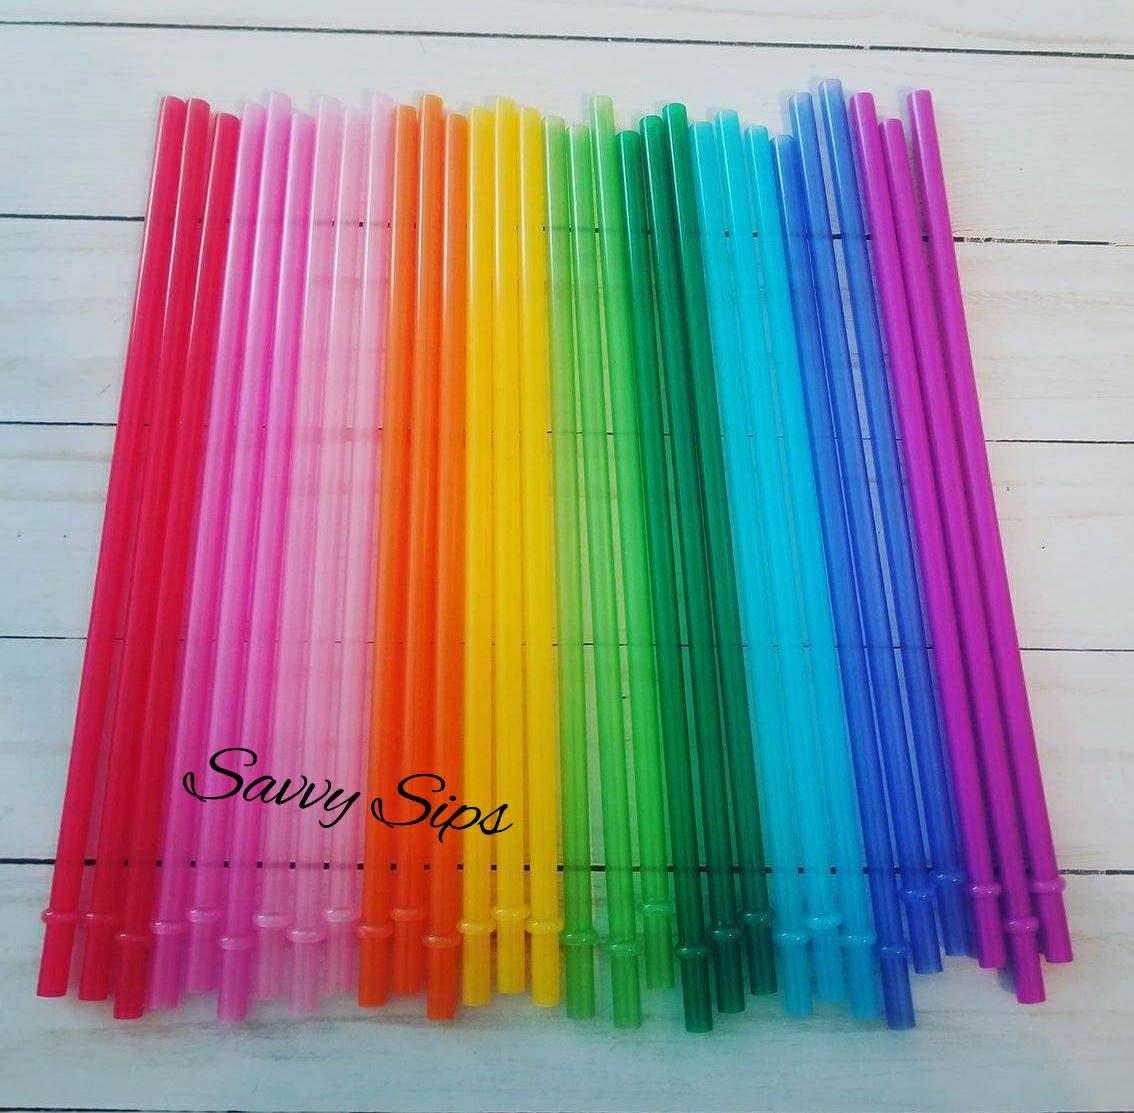 Okgd 100 Piece Reusable Hard Plastic Straws. BPA Free, 9 inch Long Stripe Drinking Straws, Outer Diameter 0.28 inch